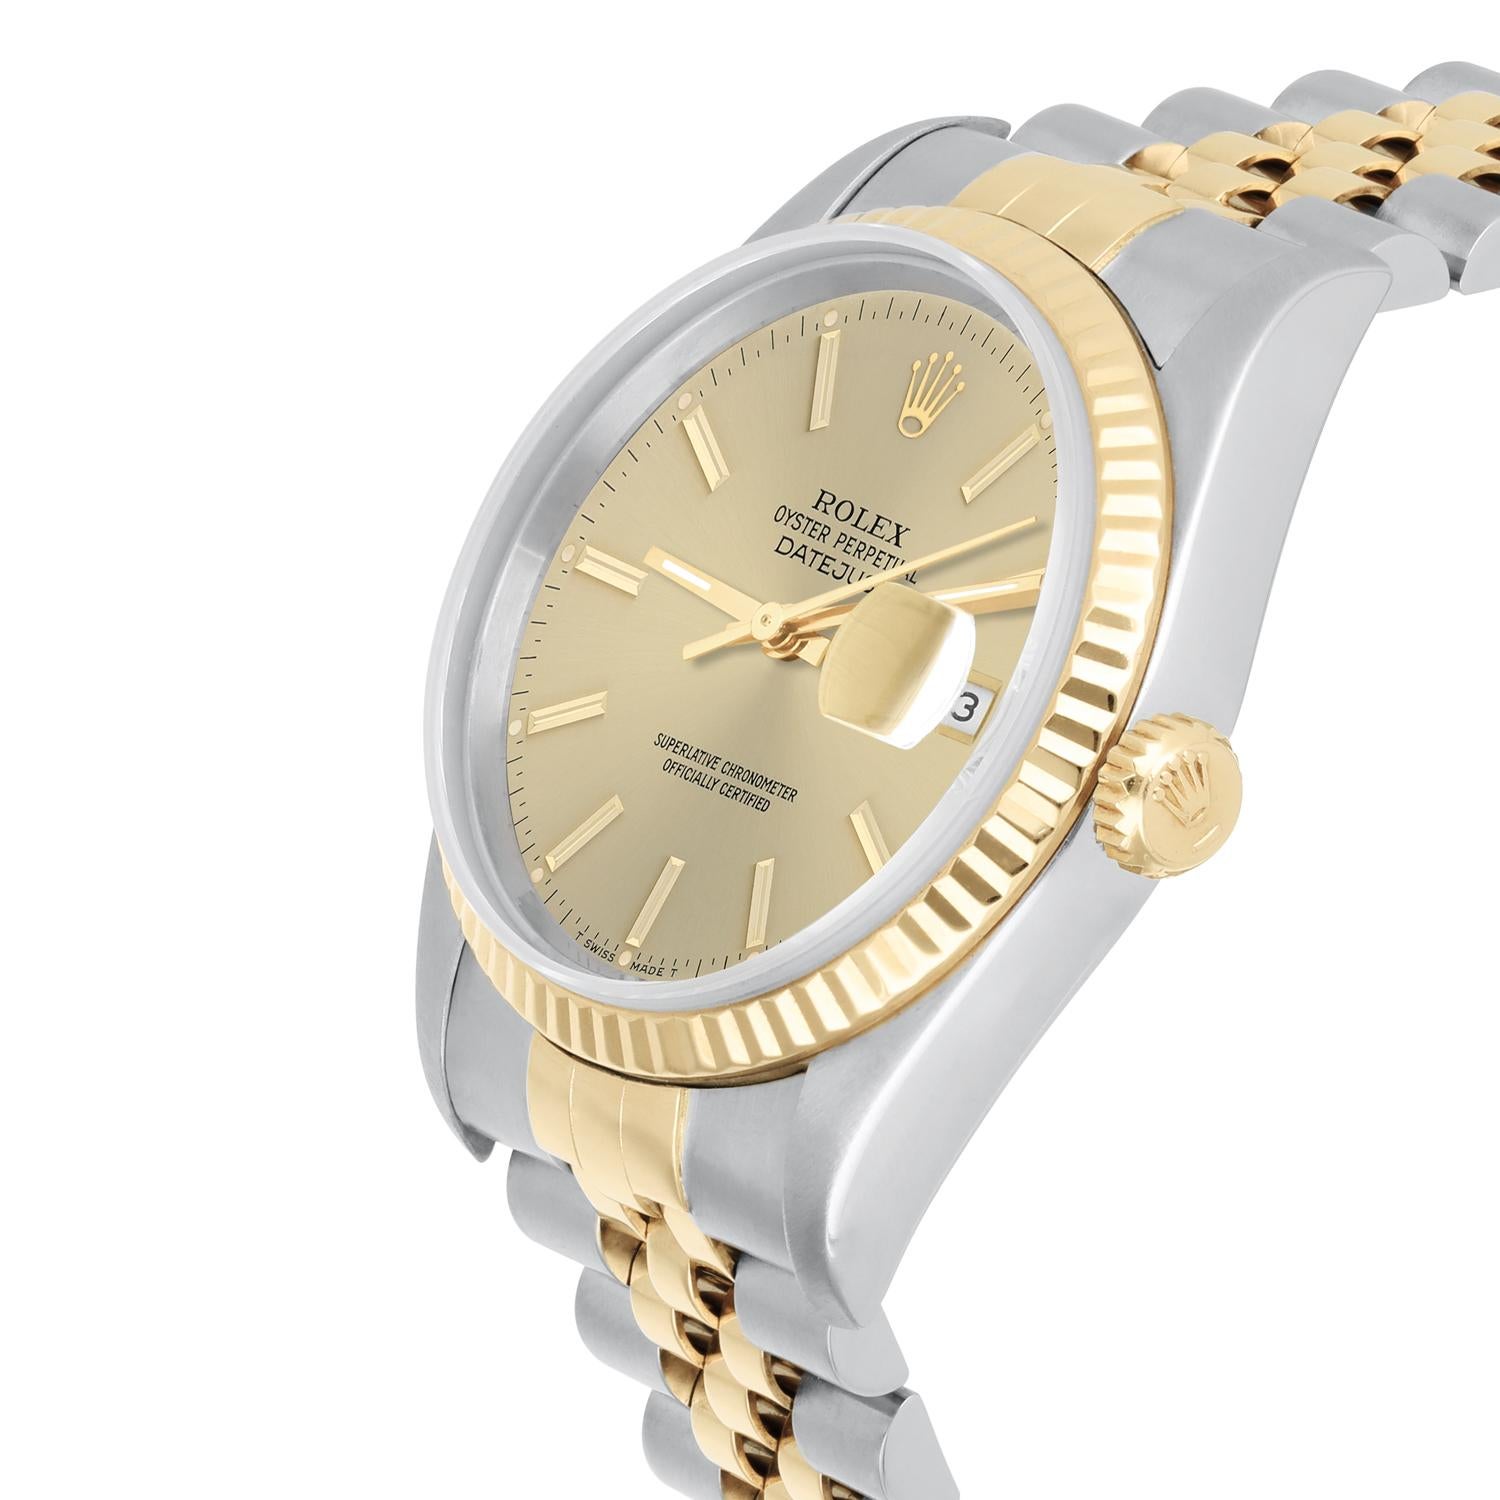 Moderne Rolex Datejust 36mm Two Tone Champagne Index Dial Jubilee 16233 Circa 1995 en vente